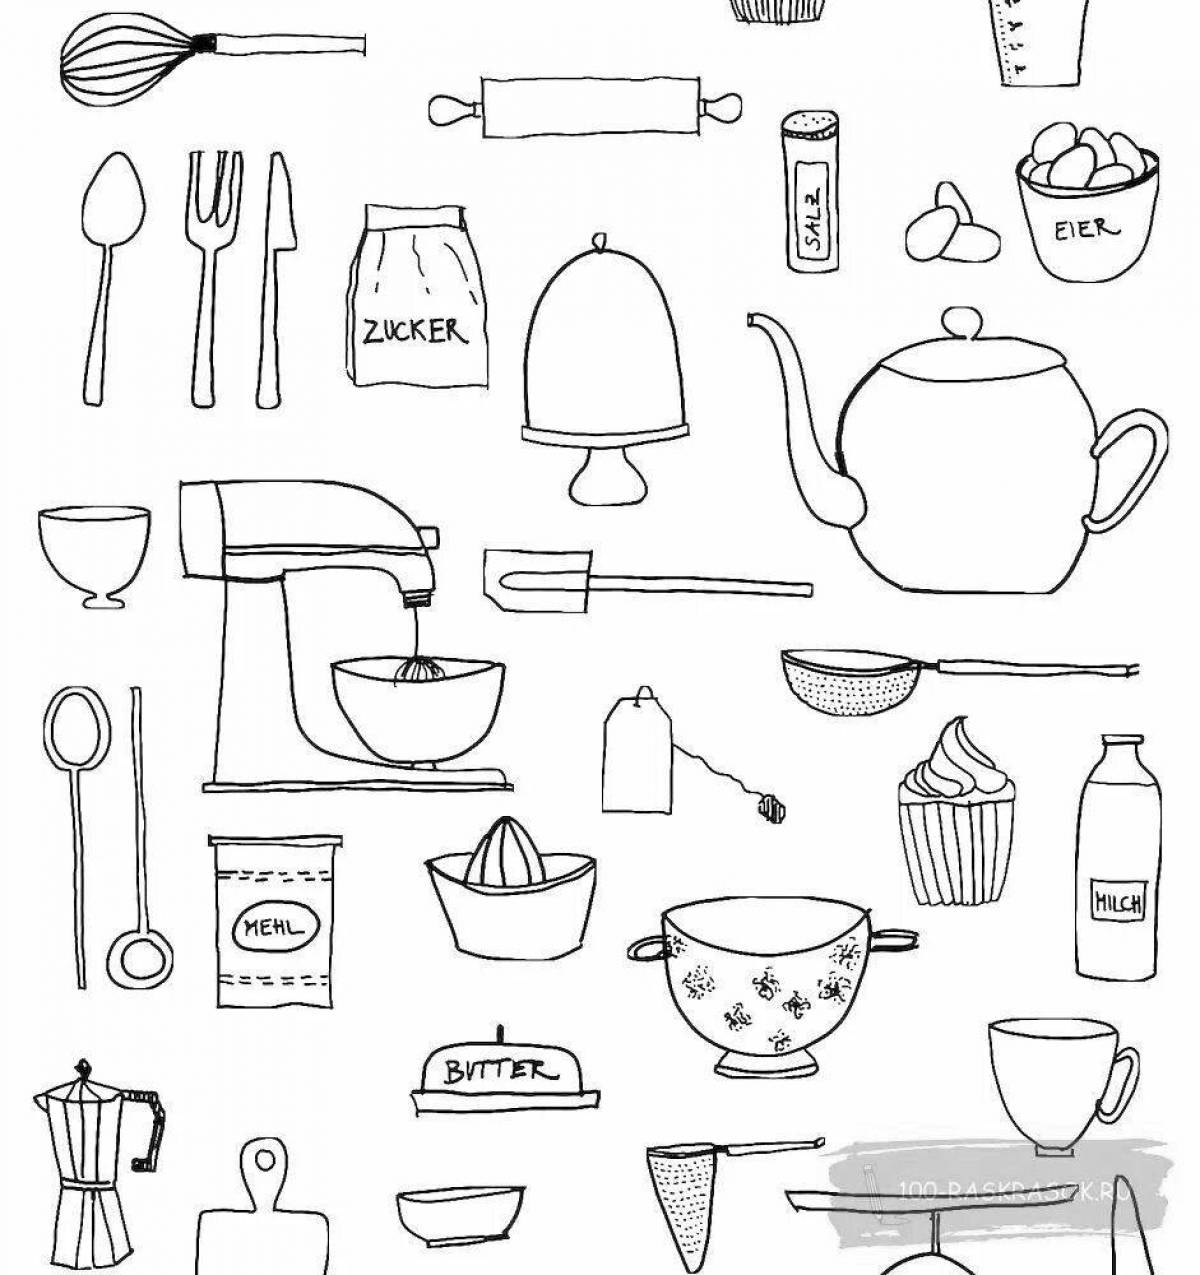 Delicious dishes and food coloring page